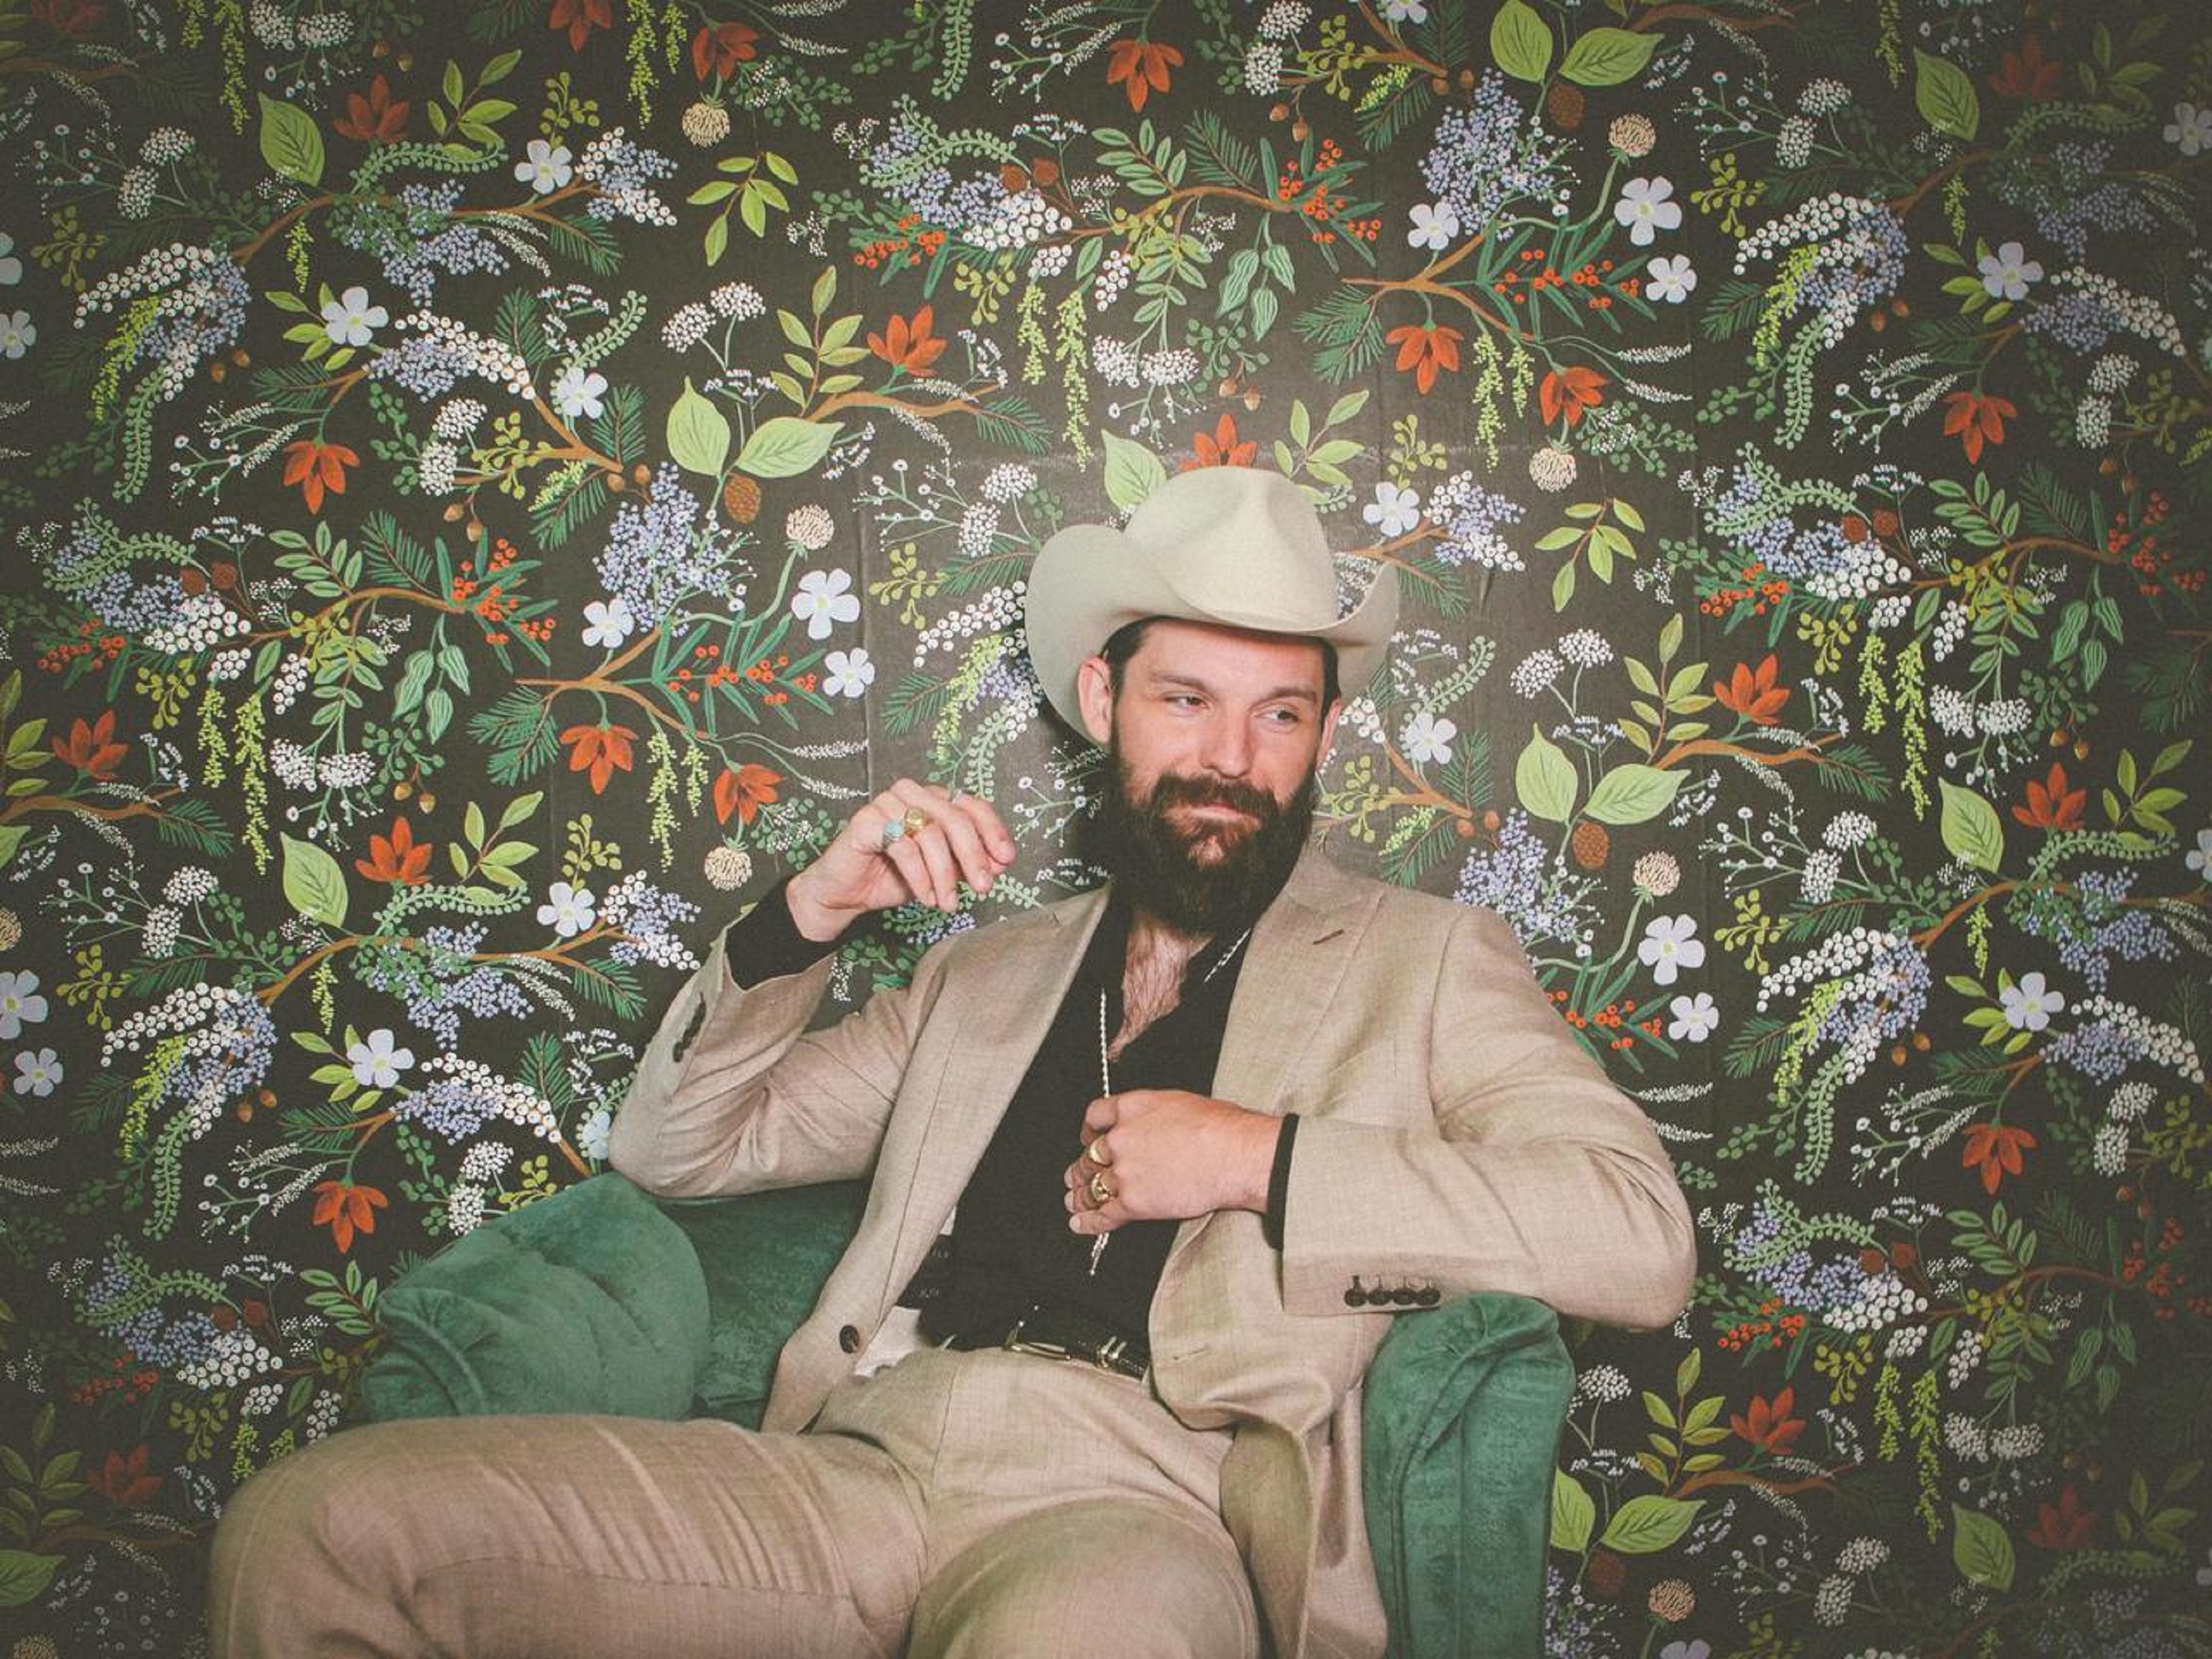 NATHAN MONGOL WELLS (OTTOMAN TURKS) RELEASES REGRETFUL, TEARS-IN-YOUR-BEER BALLAD “TAKEN FOR A RIDE,” FEATURING HANK EARLY FROM TURNPIKE TROUBADOURS